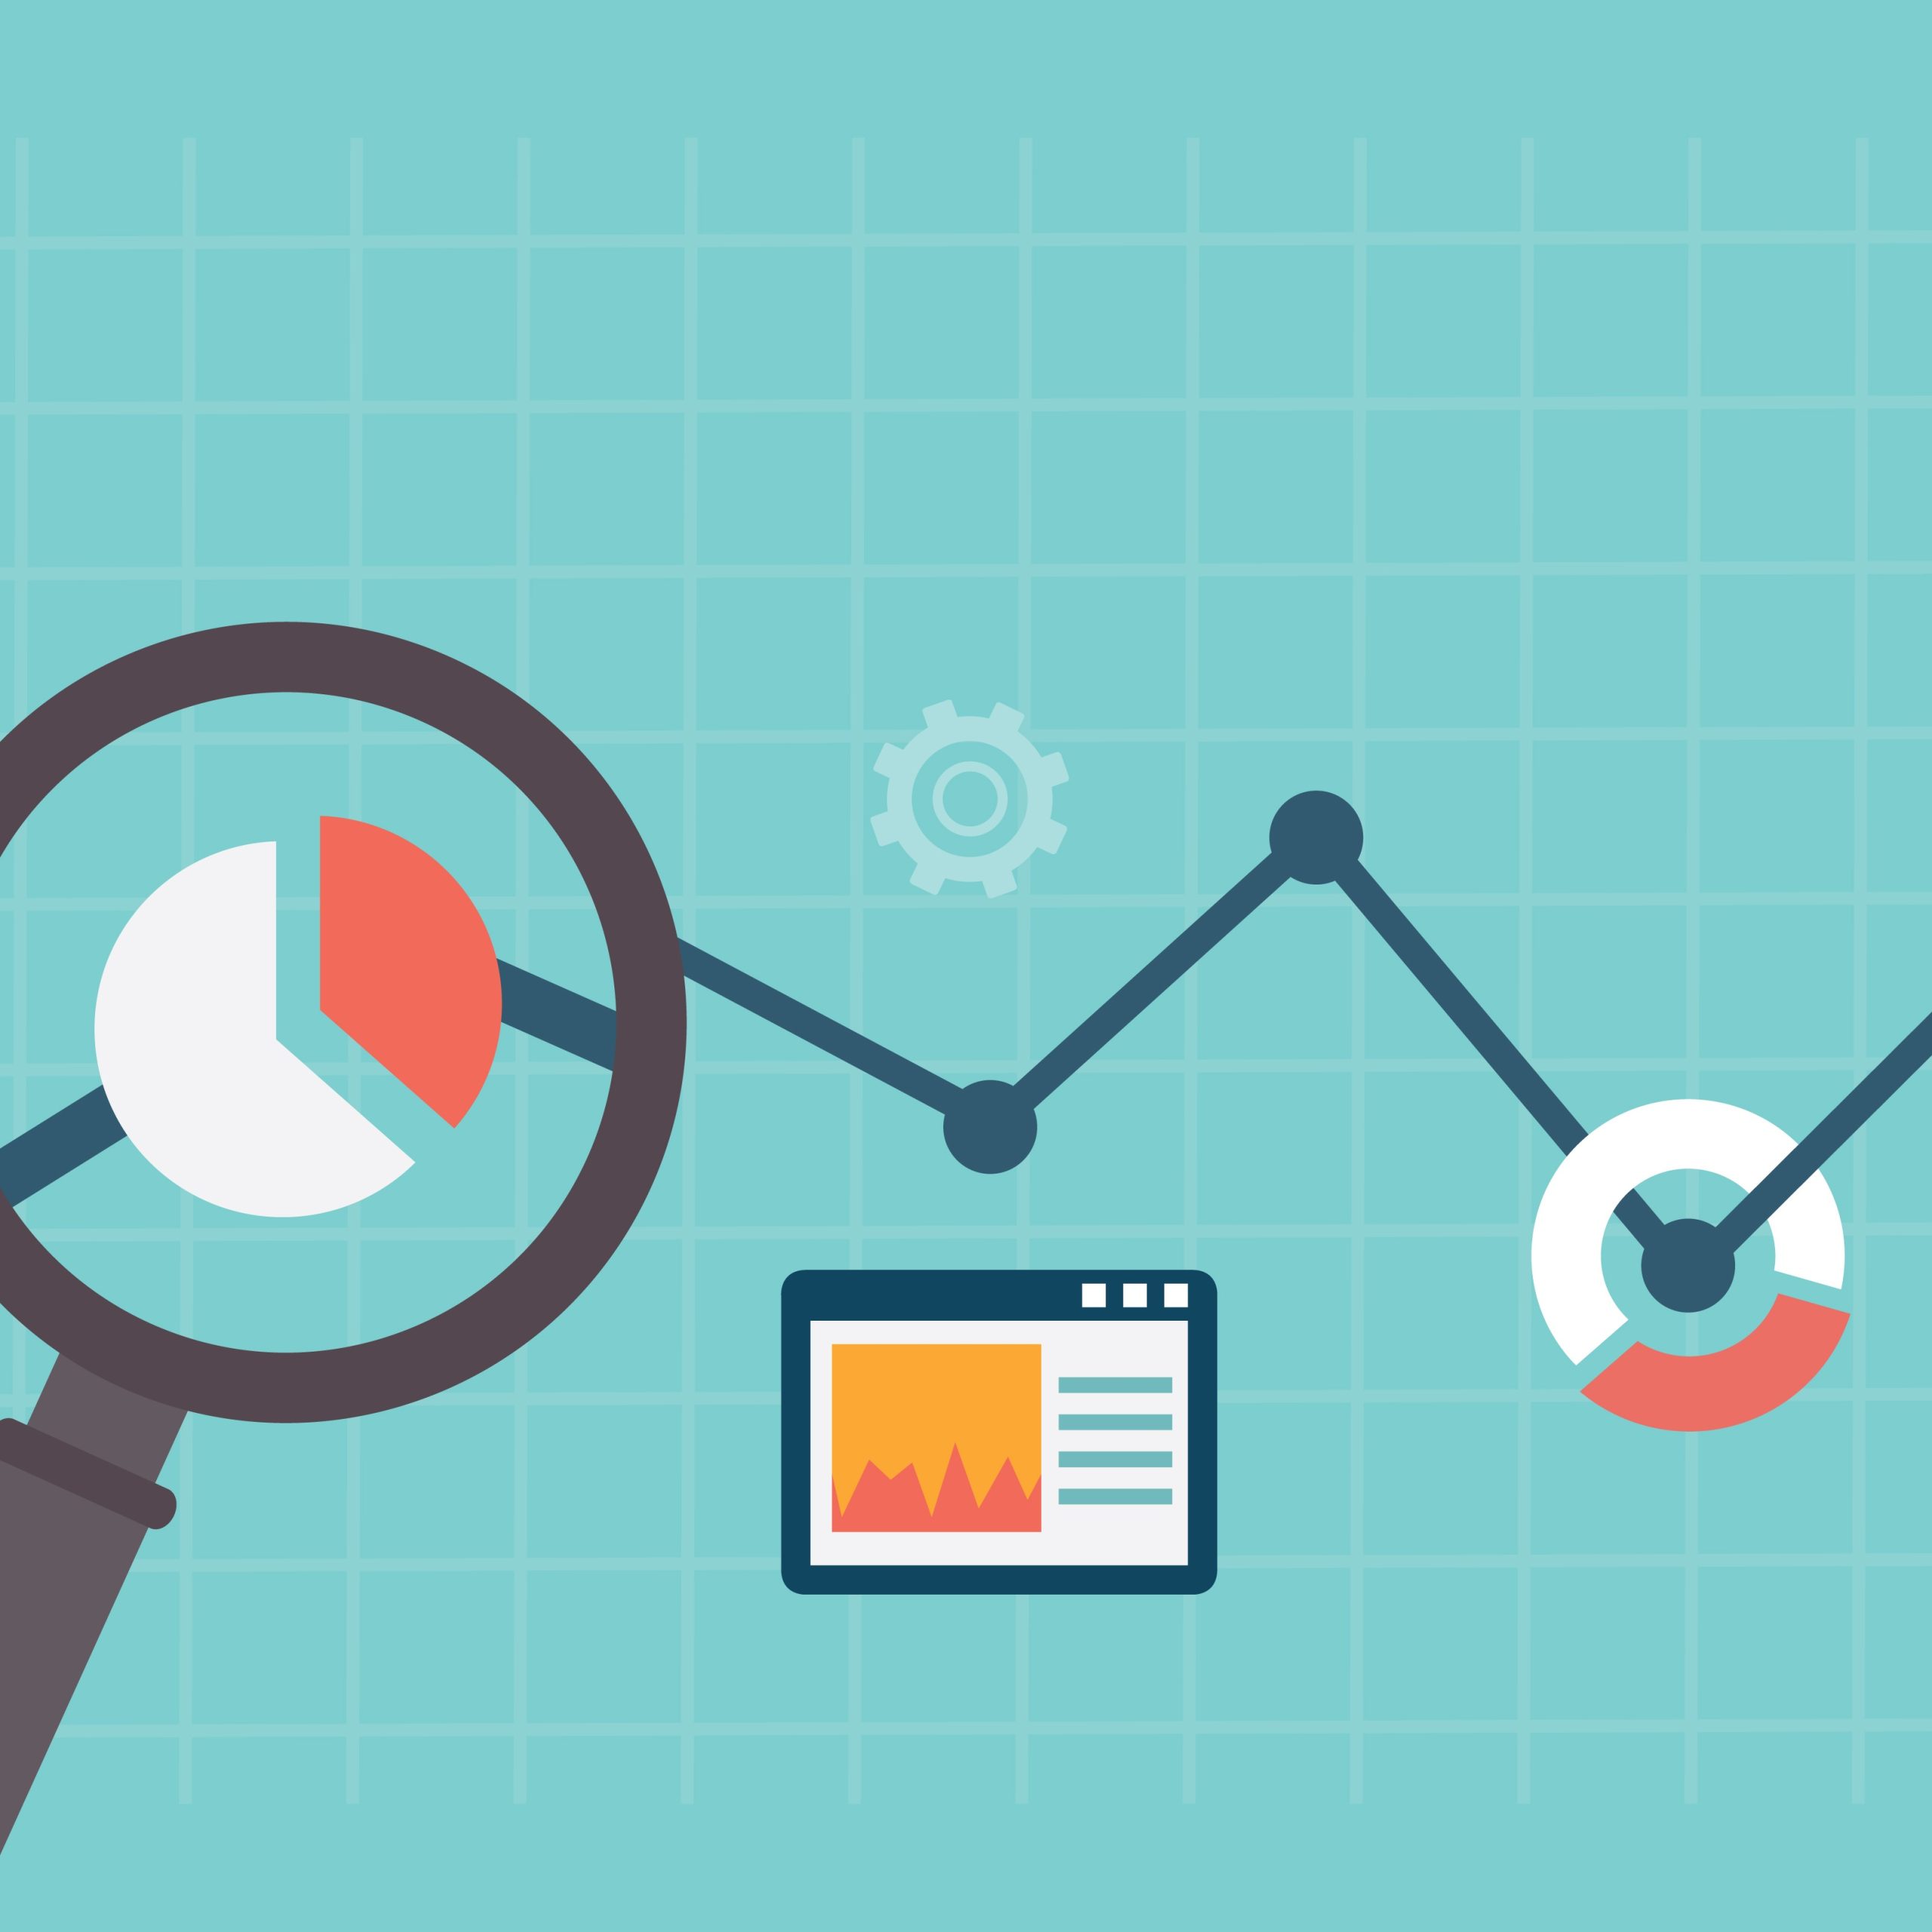 Rankings aren’t everything: how to track seo improvements